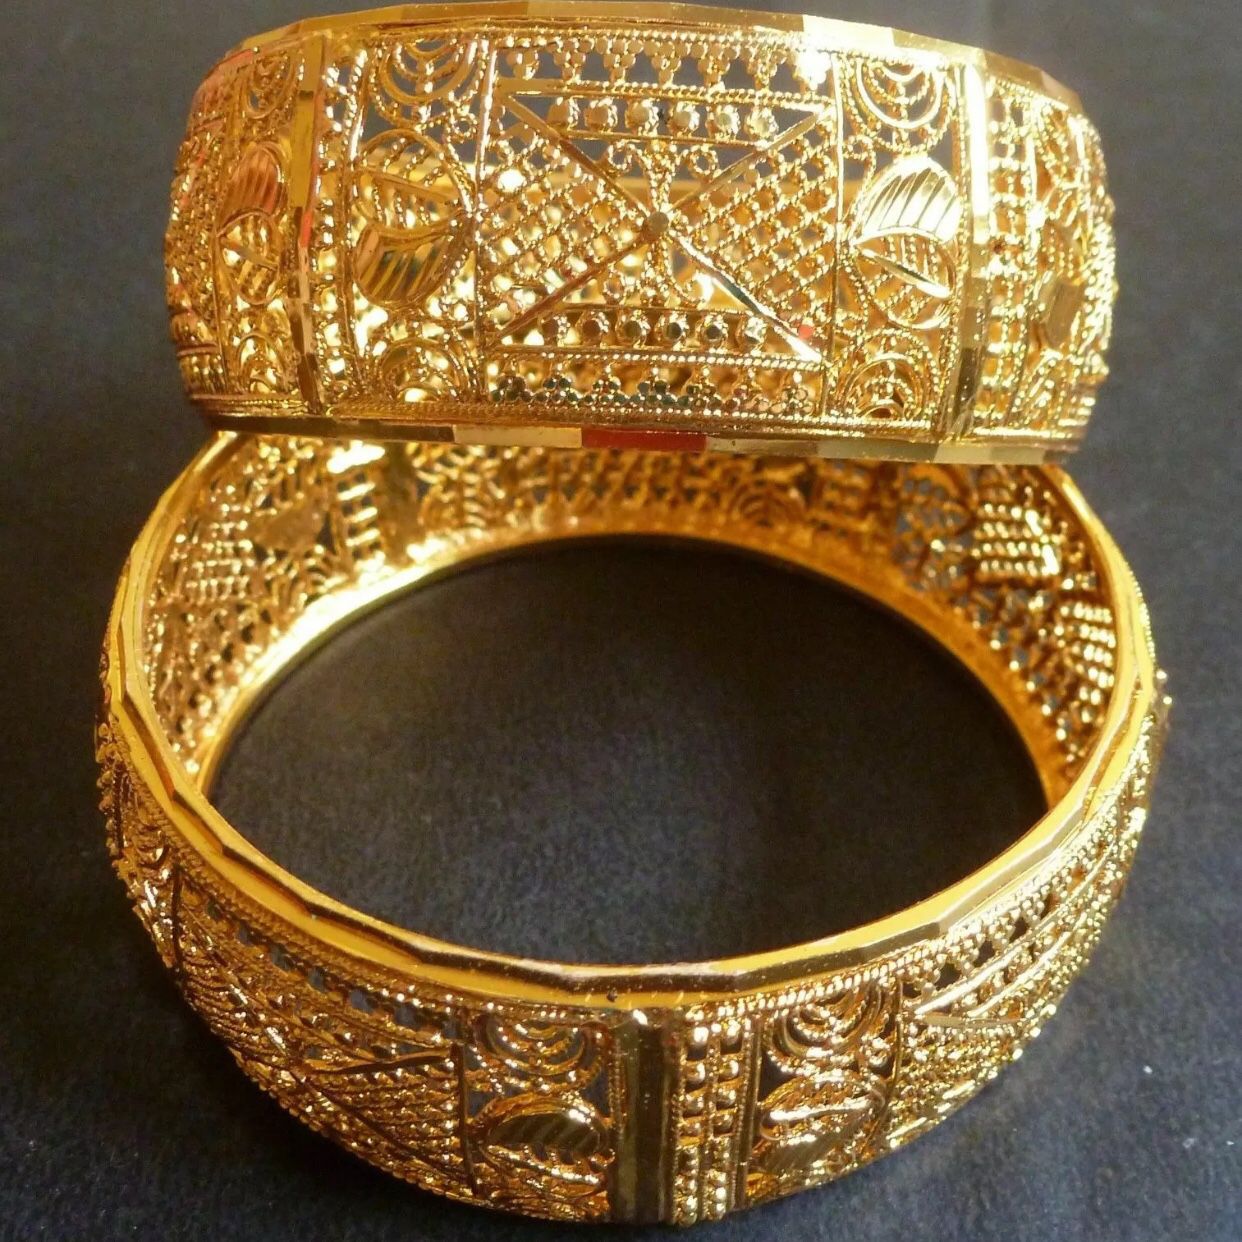 22k gold PLATED Indian Pakistani Asian bangles set jewelry accessory size 2-4” 2-6” and 2-8” available